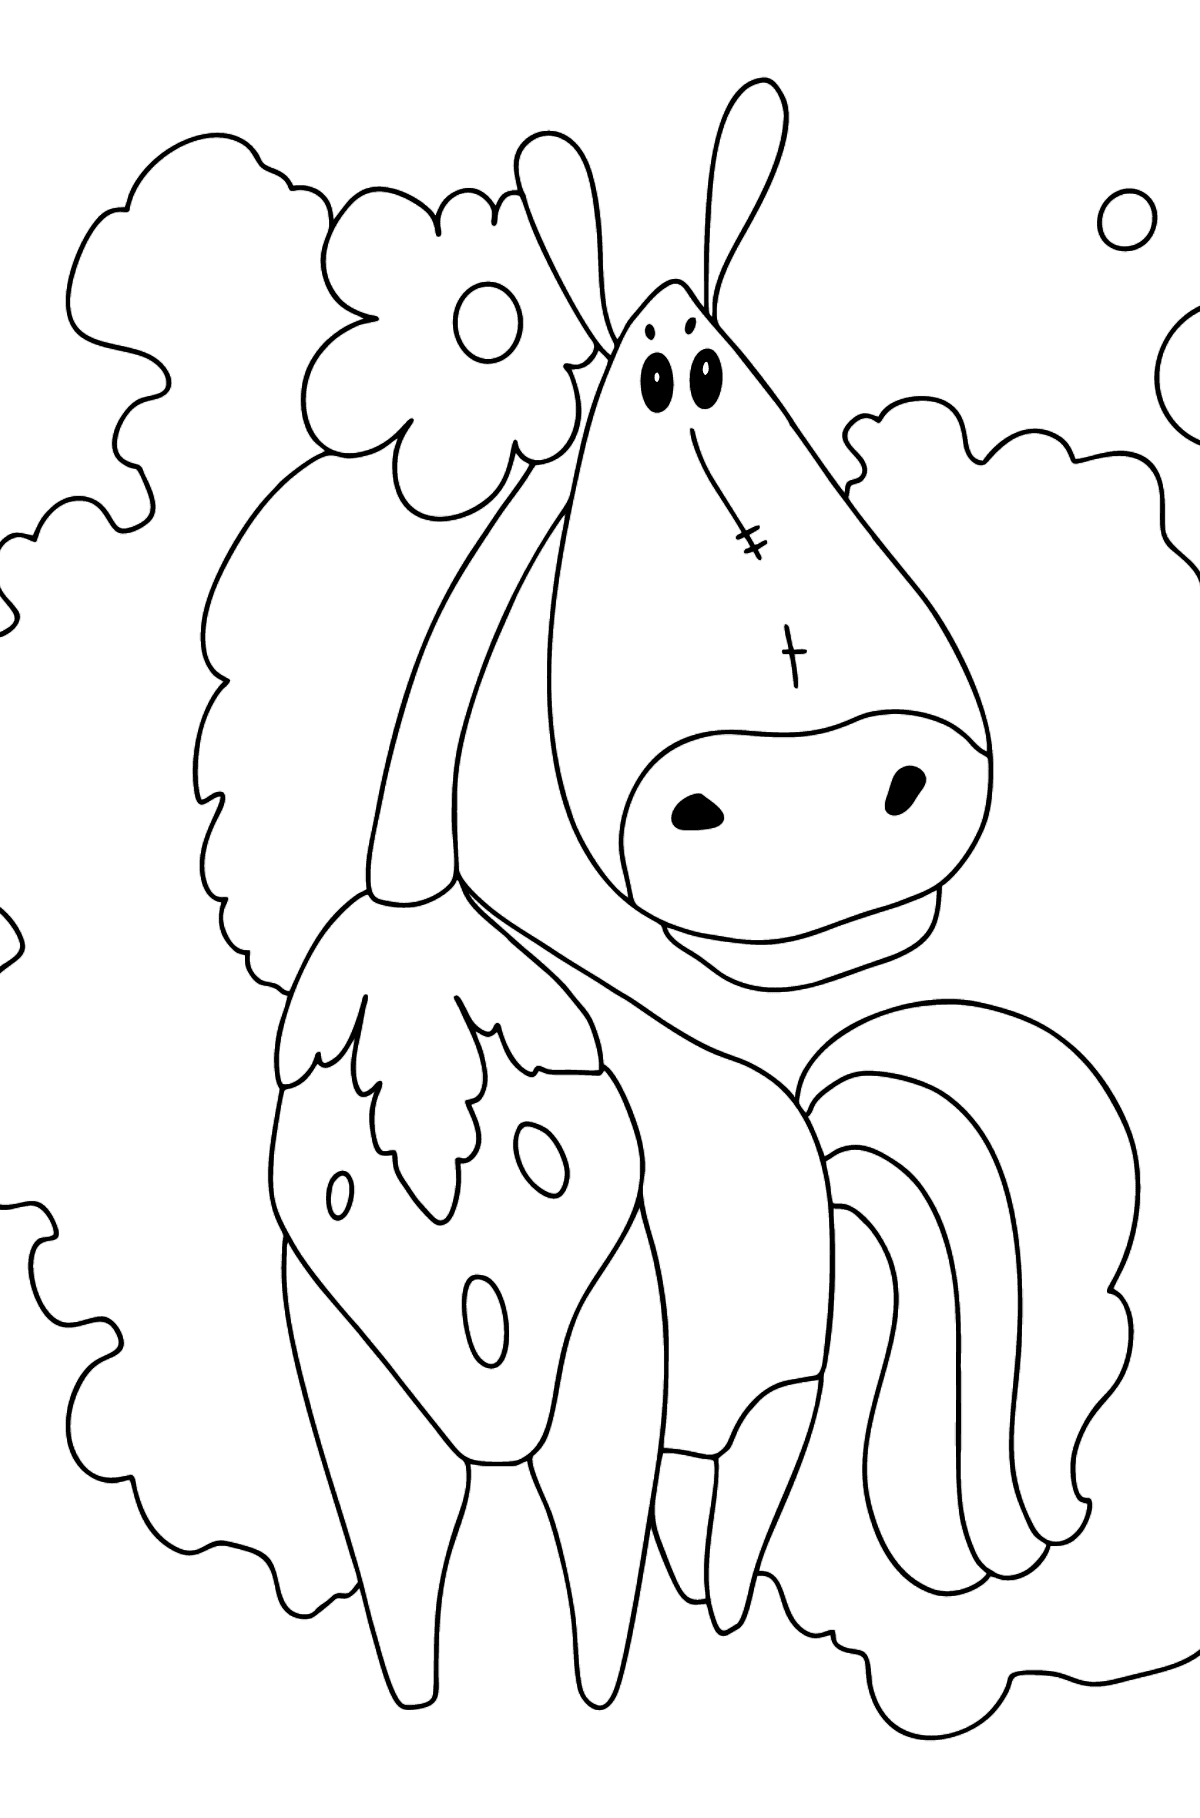 Complex coloring page a horse fashionista - Coloring Pages for Kids